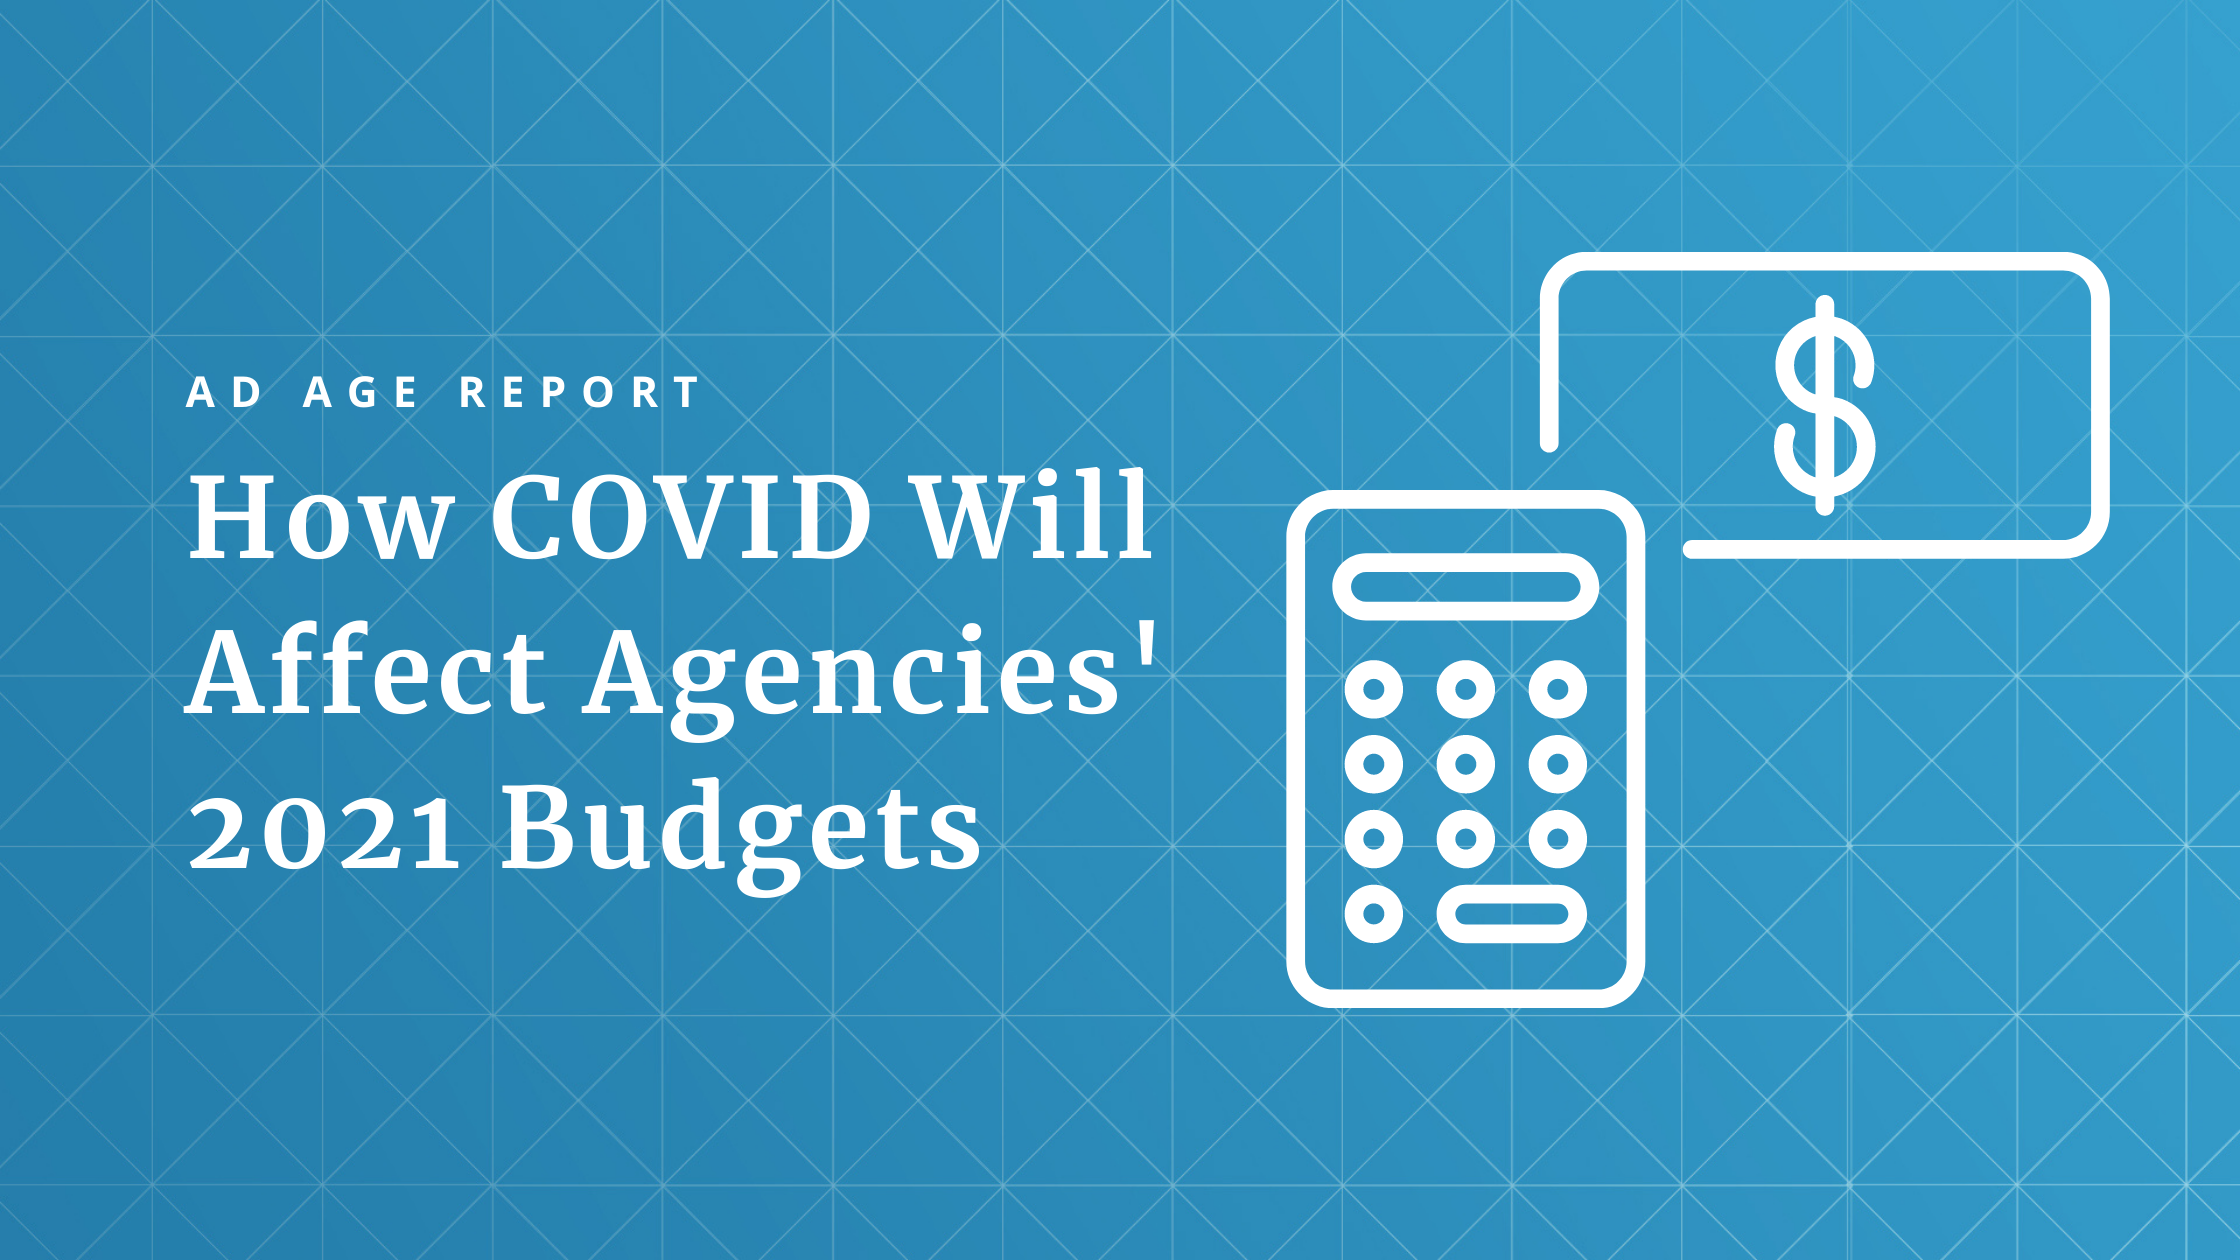 graphic of a calculator and dollar sign with text "how covid will affect agencies' 2021 budgets"